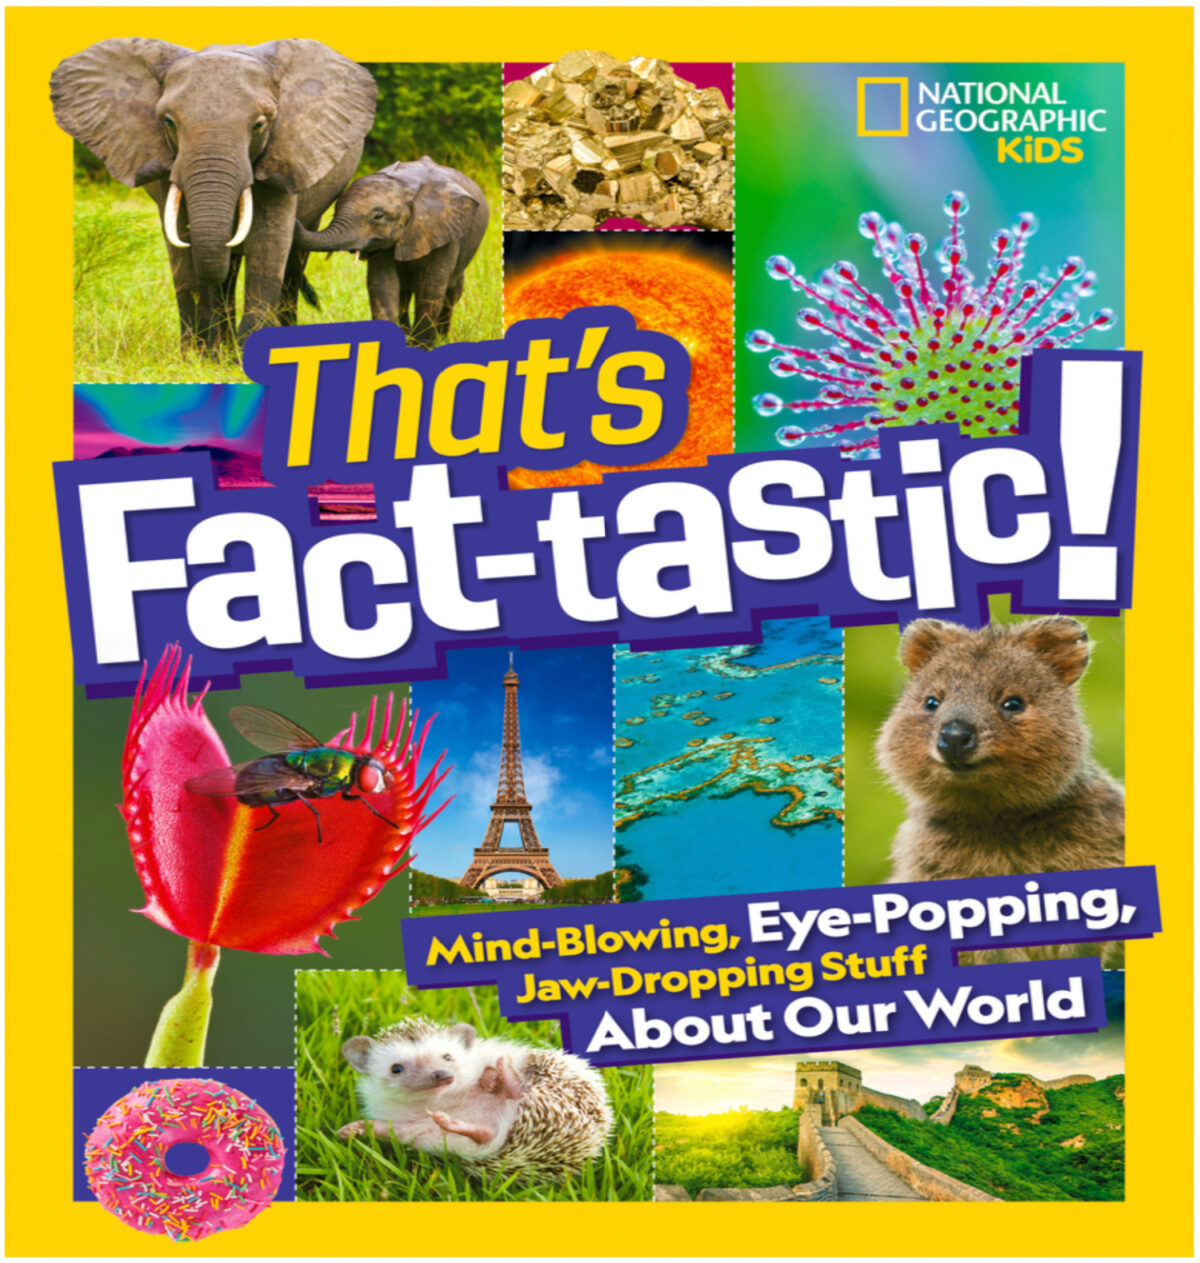 That's Fact-tastic! Mind-Blowing, Eye-Popping, Jaw-Dropping Stuff About Our World   (ages 8-12, Hardcover, $19.99)